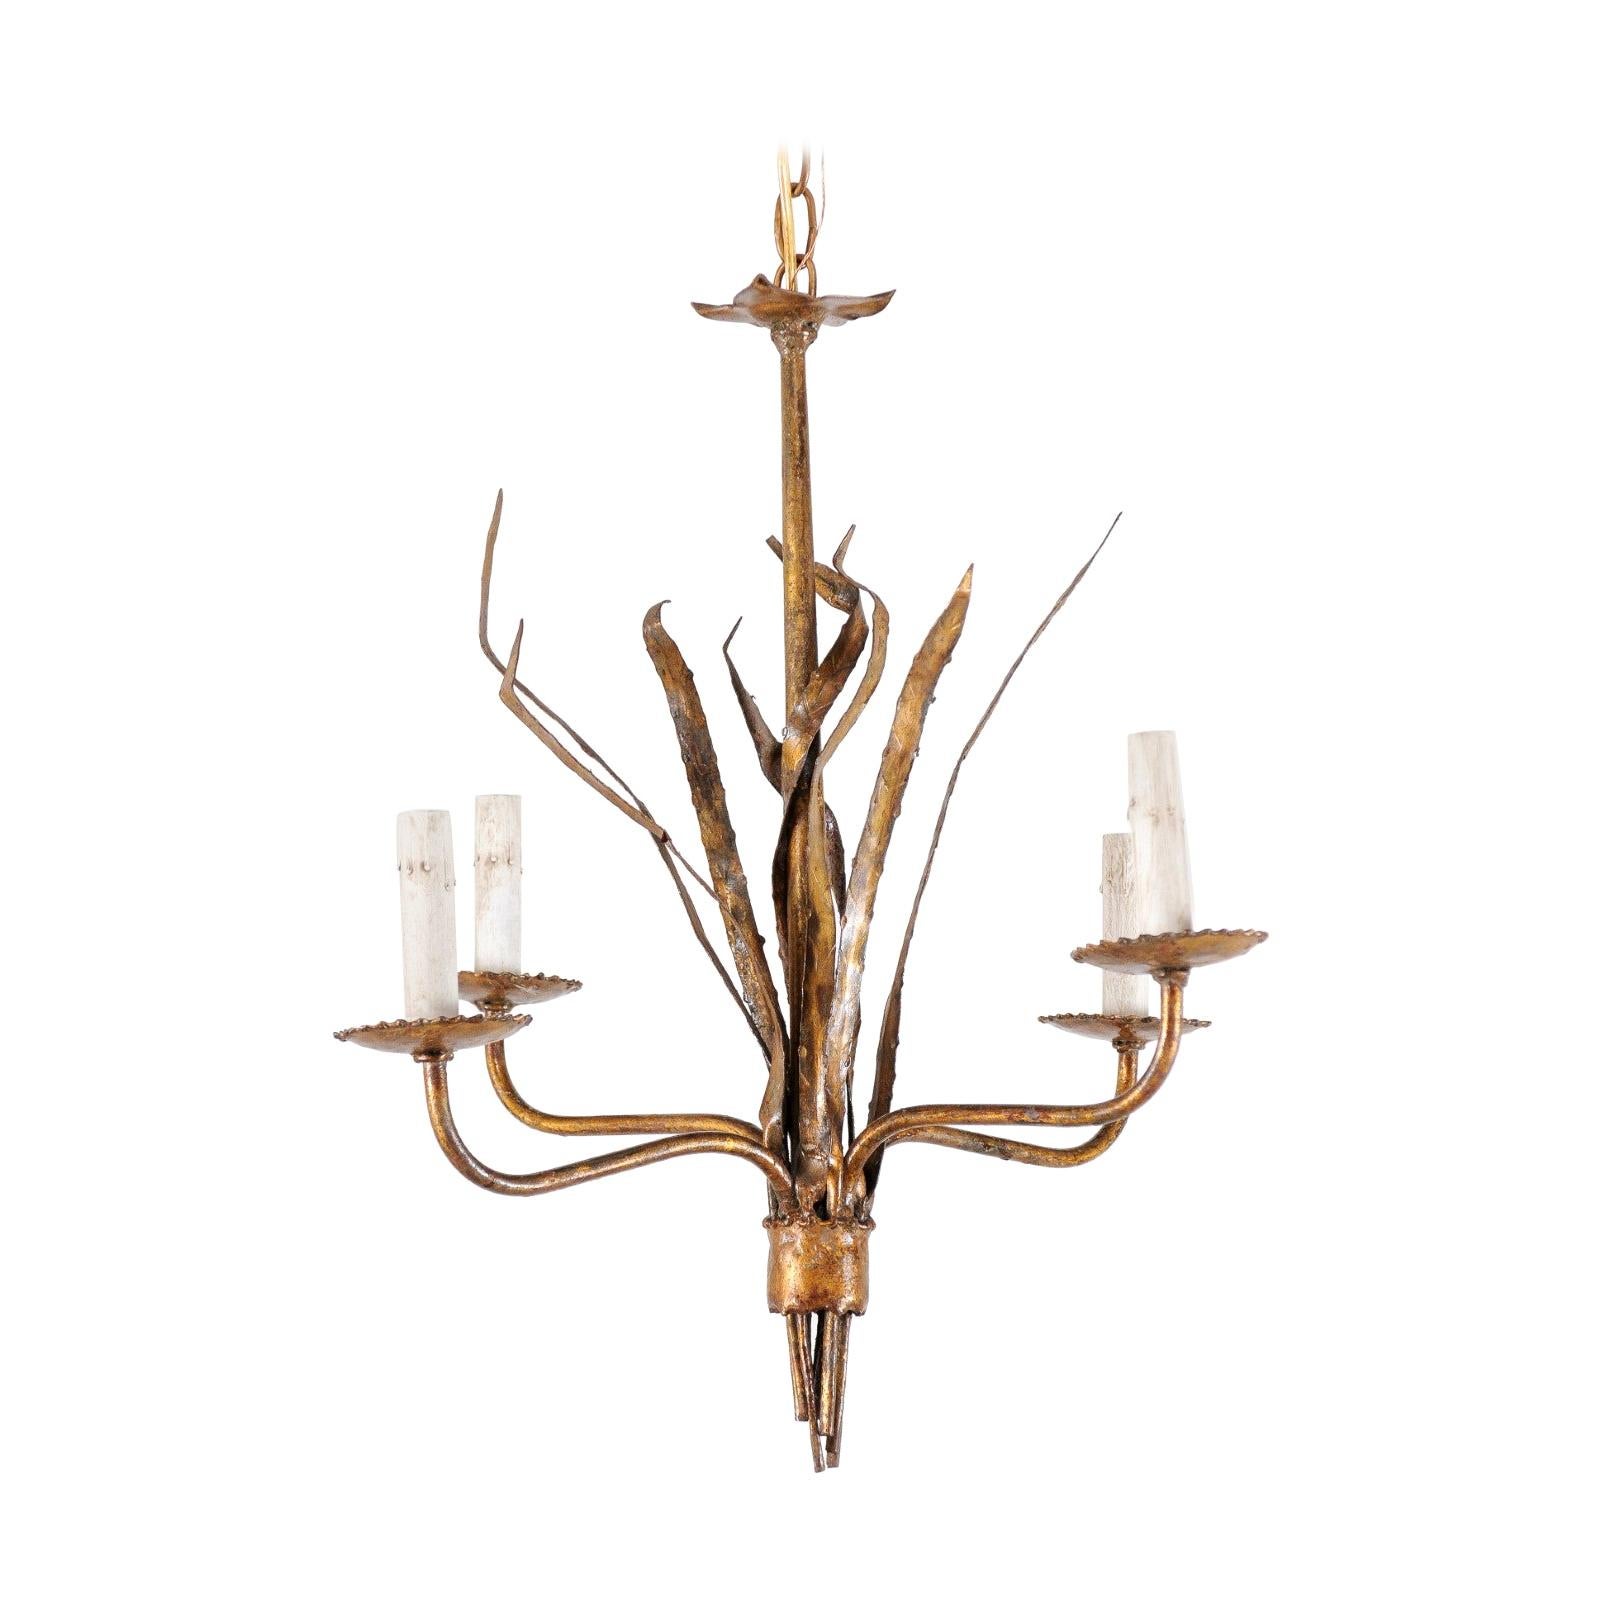 French Mid-20th Century Four-Light Iron Toned Chandelier in Leaf Foliage Motif